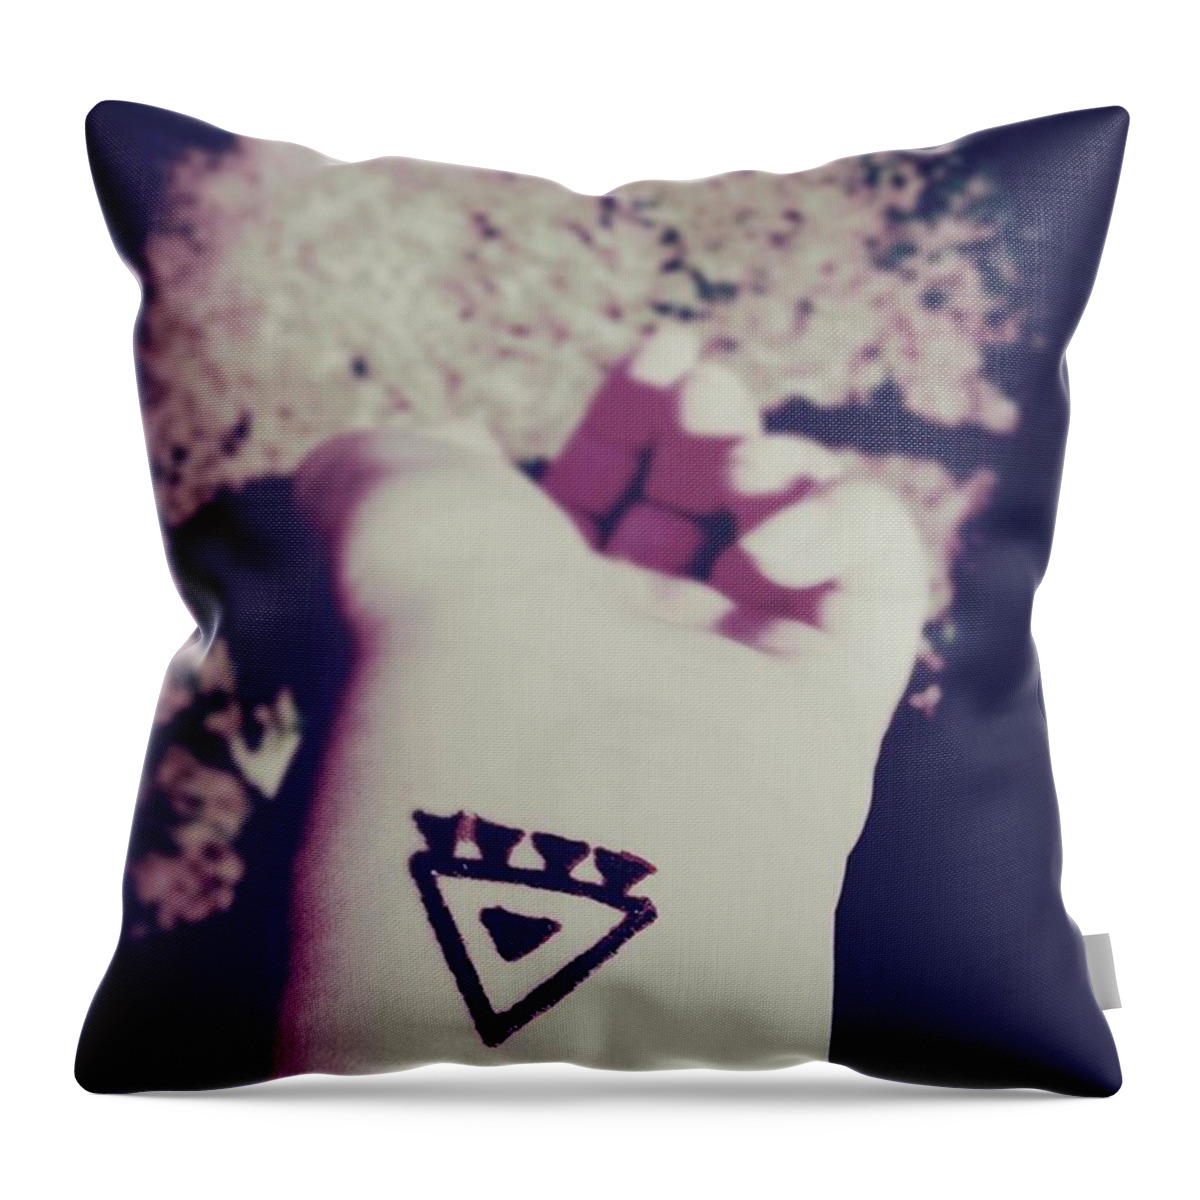 Symbols Throw Pillow featuring the photograph Symbol 2 by Gypsy Heart